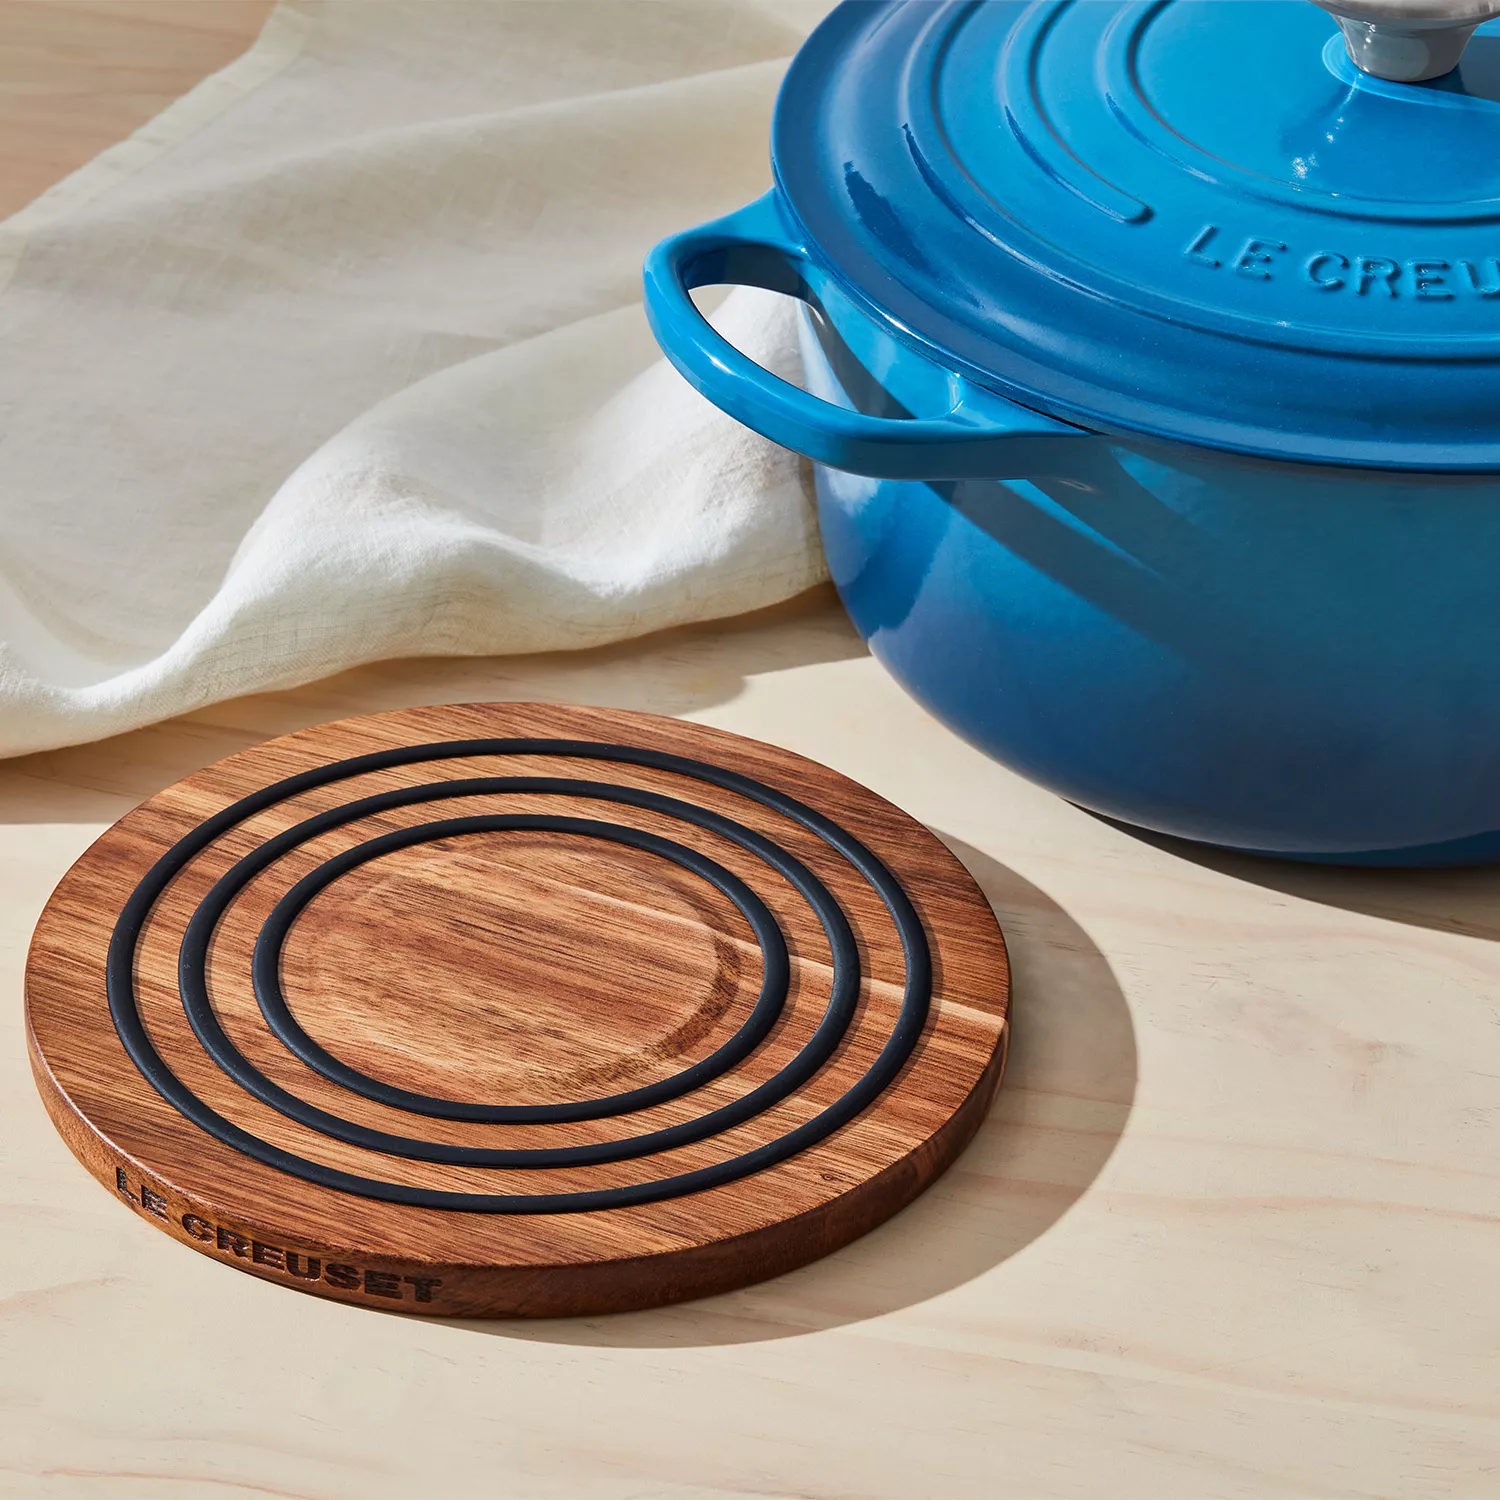 Enameled Cast Iron, Grill Pan with Acacia Wood Trivet, 11 inch